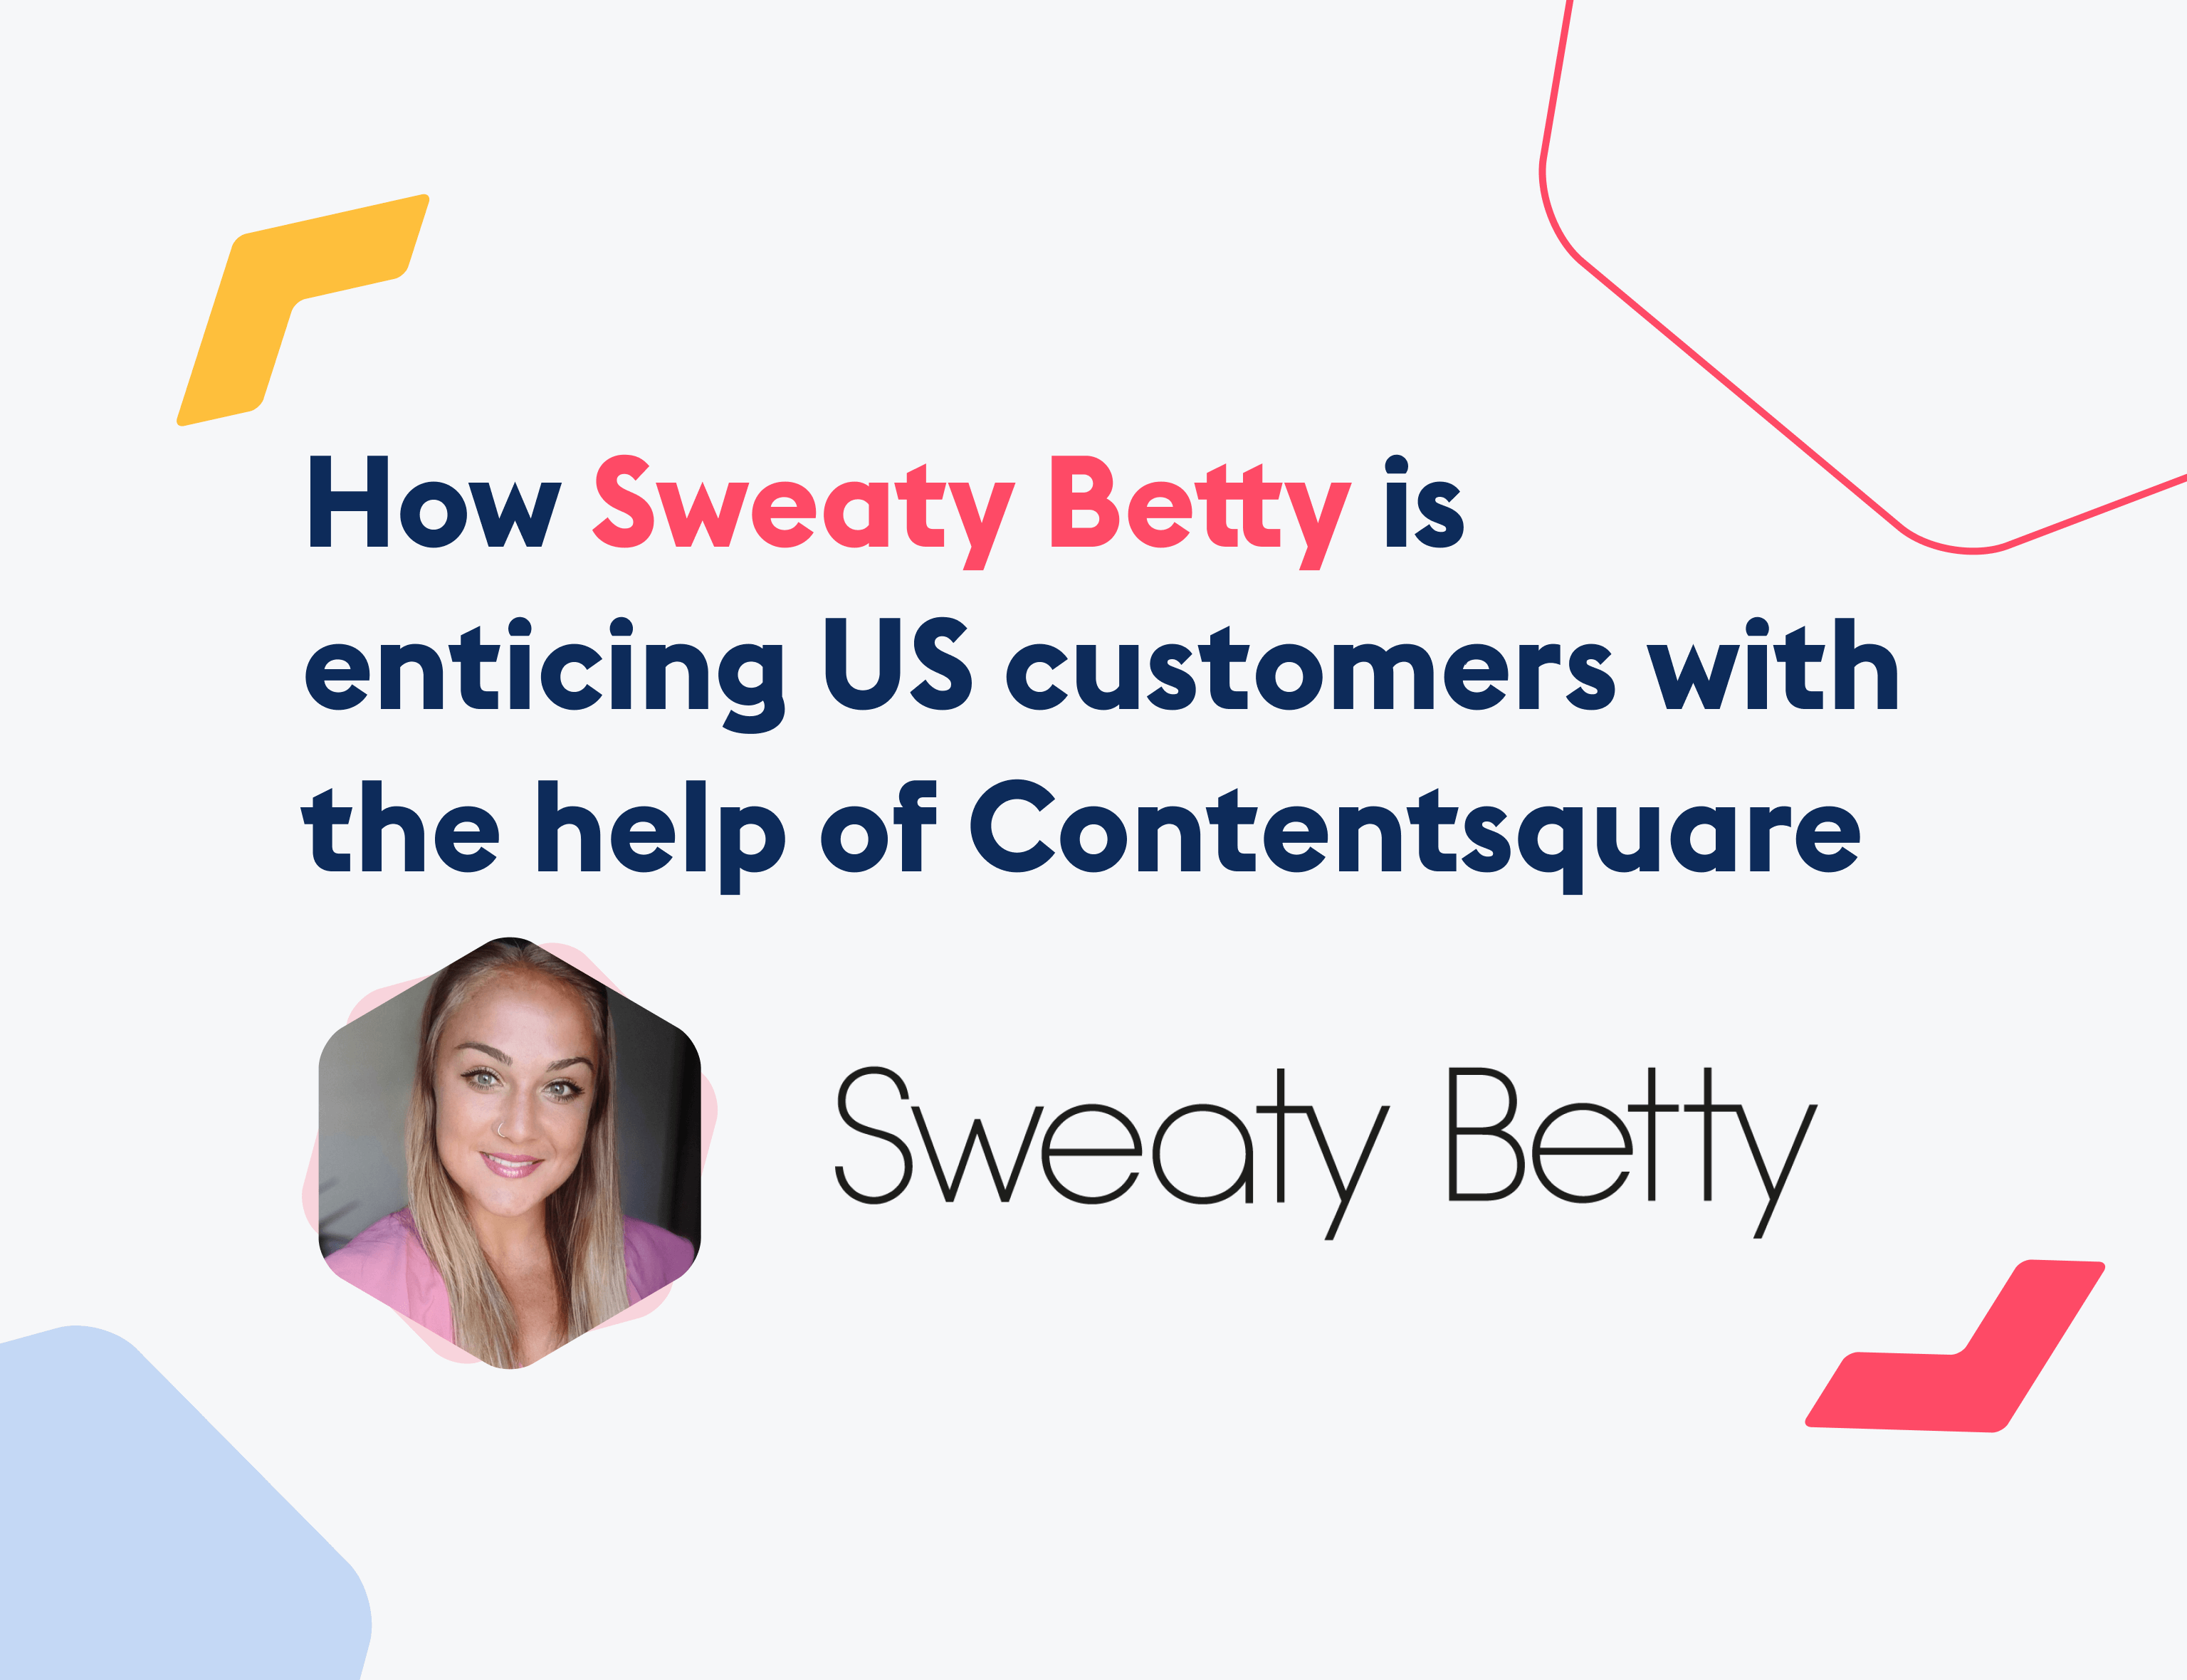 The perfect fit: How Sweaty Betty is enticing US customers with